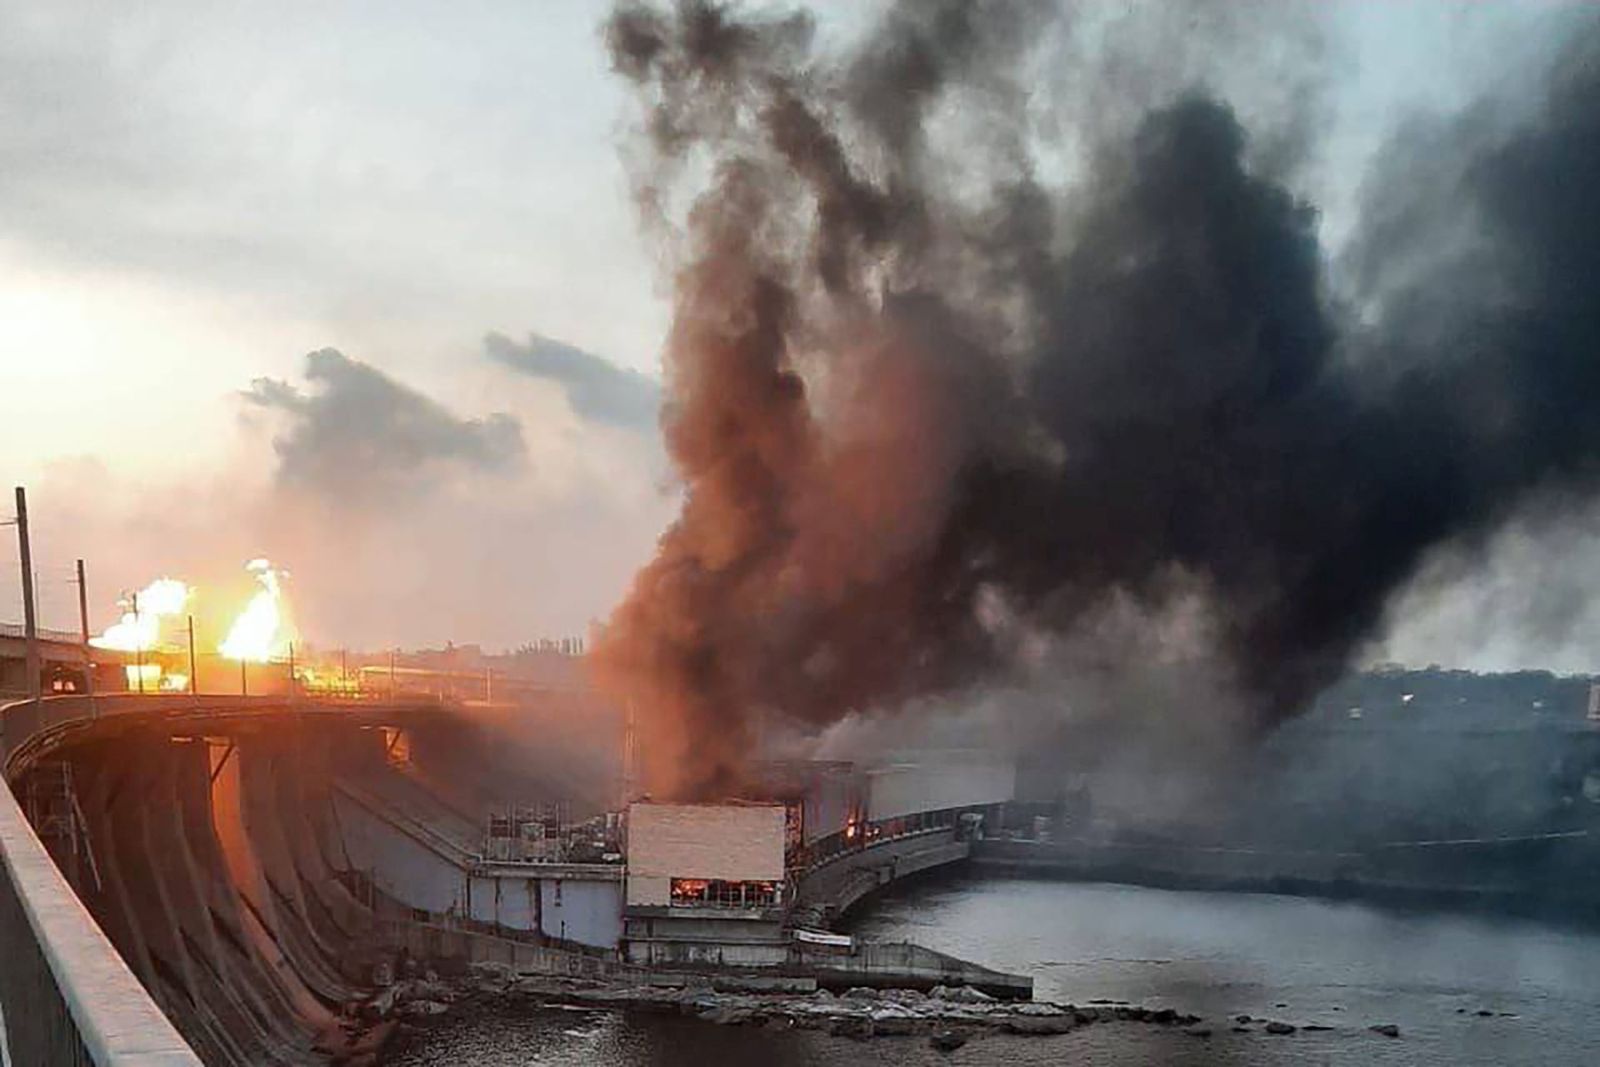 Putin's army strikes Ukraine in the biggest attack to date on its energy infrastructure: multiple cities targeted in a coordinated assault by kamikaze drones and missiles, Dnipro Hydroelectric Power Plant hit (pictured),Image: 858719893, License: Rights-managed, Restrictions: ***
HANDOUT image or SOCIAL MEDIA IMAGE or FILMSTILL for EDITORIAL USE ONLY! * Please note: Fees charged by Profimedia are for the Profimedia's services only, and do not, nor are they intended to, convey to the user any ownership of Copyright or License in the material. Profimedia does not claim any ownership including but not limited to Copyright or License in the attached material. By publishing this material you (the user) expressly agree to indemnify and to hold Profimedia and its directors, shareholders and employees harmless from any loss, claims, damages, demands, expenses (including legal fees), or any causes of action or allegation against Profimedia arising out of or connected in any way with publication of the material. Profimedia does not claim any copyright or license in the attached materials. Any downloading fees charged by Profimedia are for Profimedia's services only. * Handling Fee Only 
***, Model Release: no, Credit line: east2west news / WillWest News / Profimedia